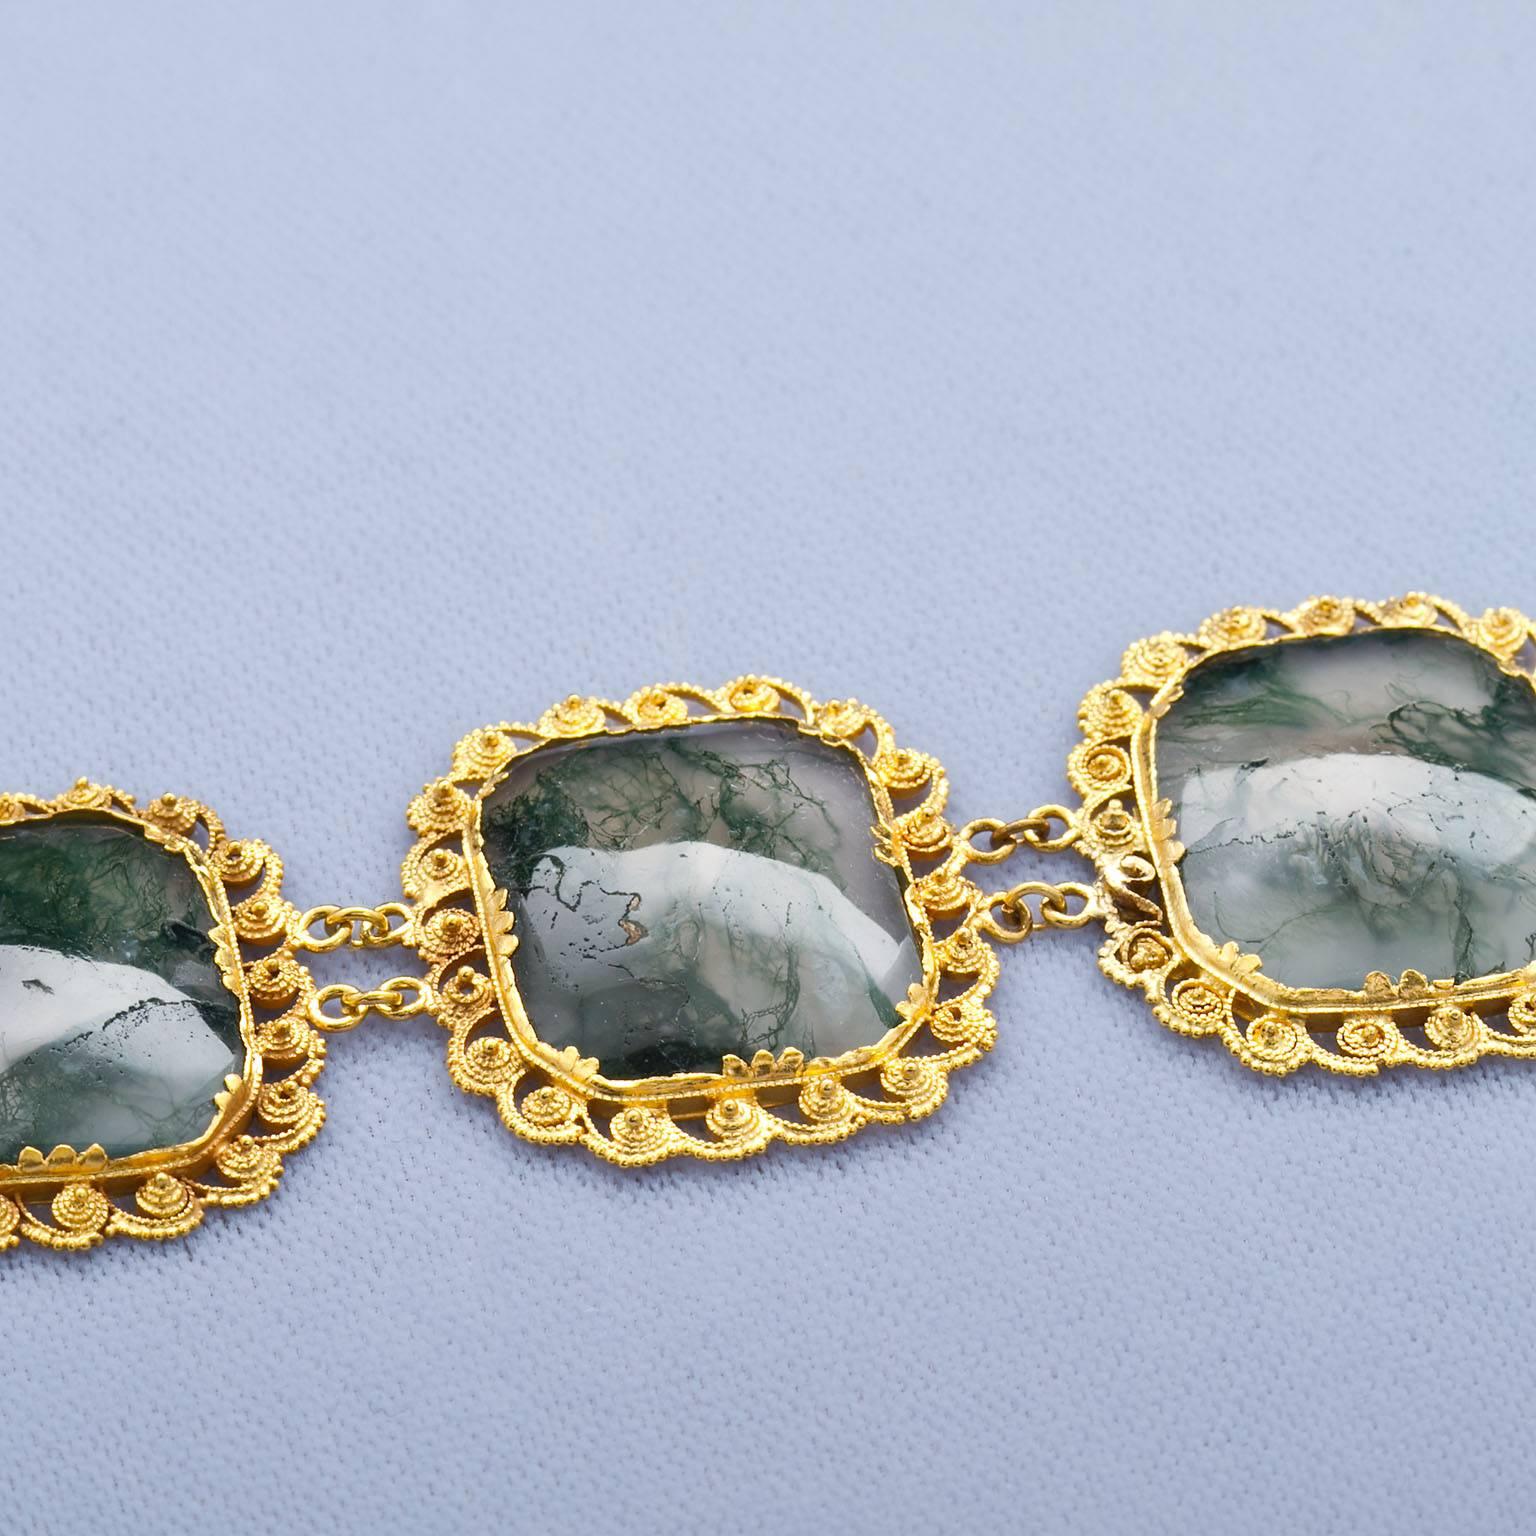 A unique gold and moss agate link bracelet contains six moss agate panels set in filgree and beaded yellow gold. Circa 1820.  In custom leather and silk case stamped on the interior Watherston &; Son,  12 Pallmott East, London

No. 2436